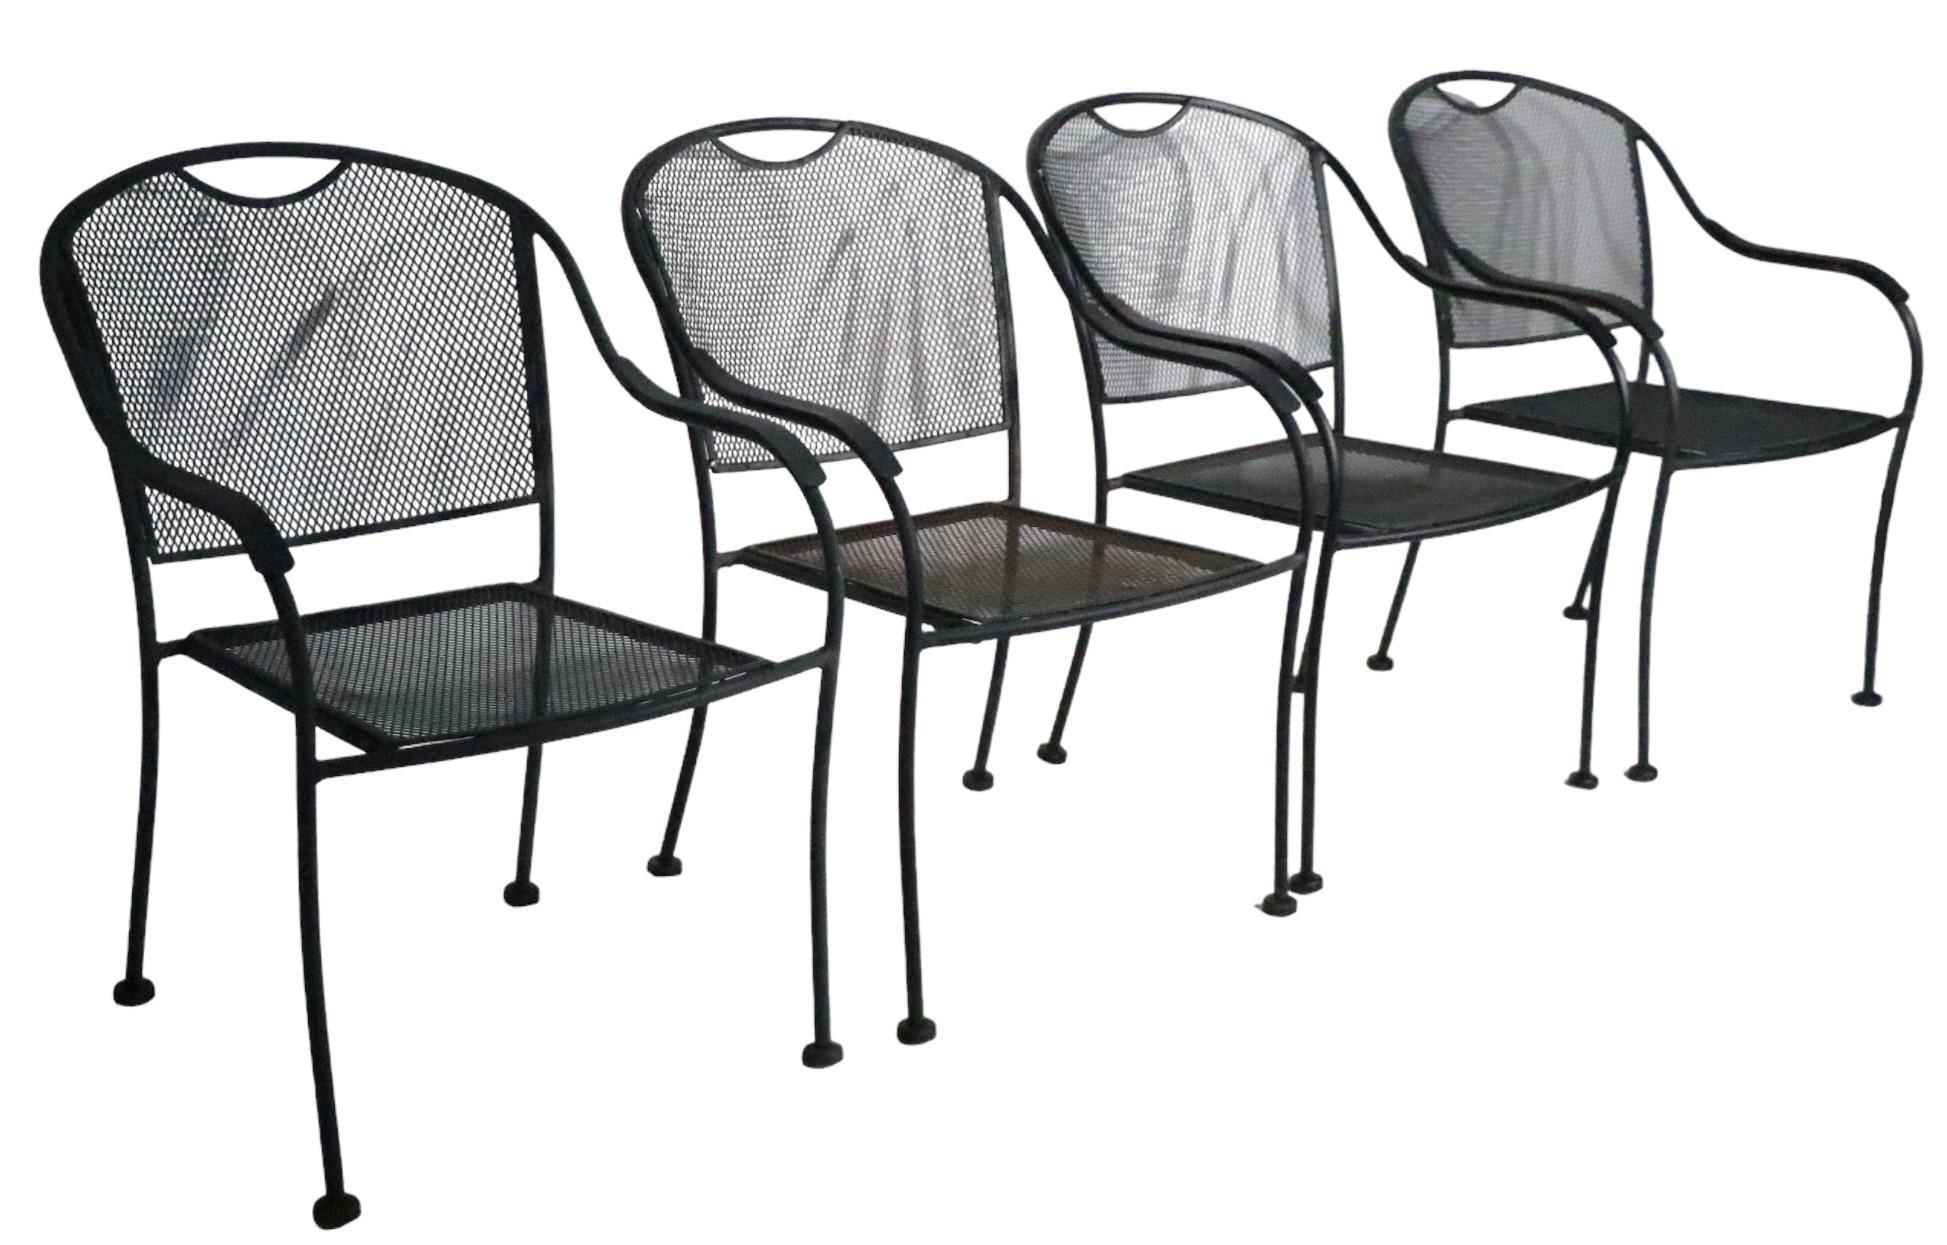 Set of Four Modernist Metal Garden Patio Dining Chairs in the style of Woodard For Sale 7